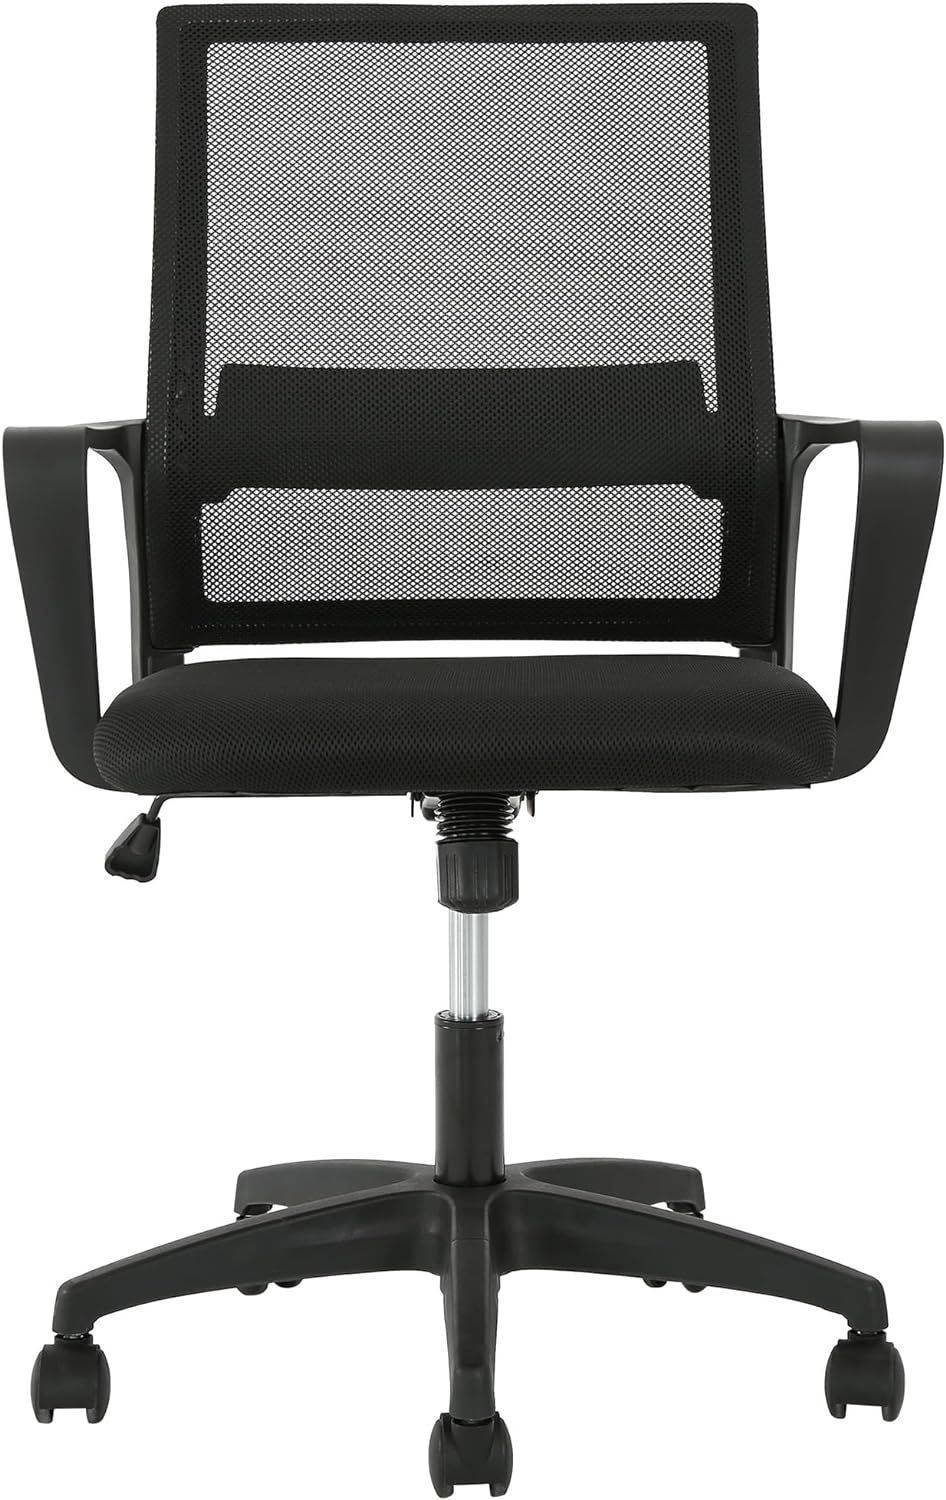 BestOffice Executive Chair with Lumbar Support & Swivel, 250 lb. Capacity, Black - image 1 of 7